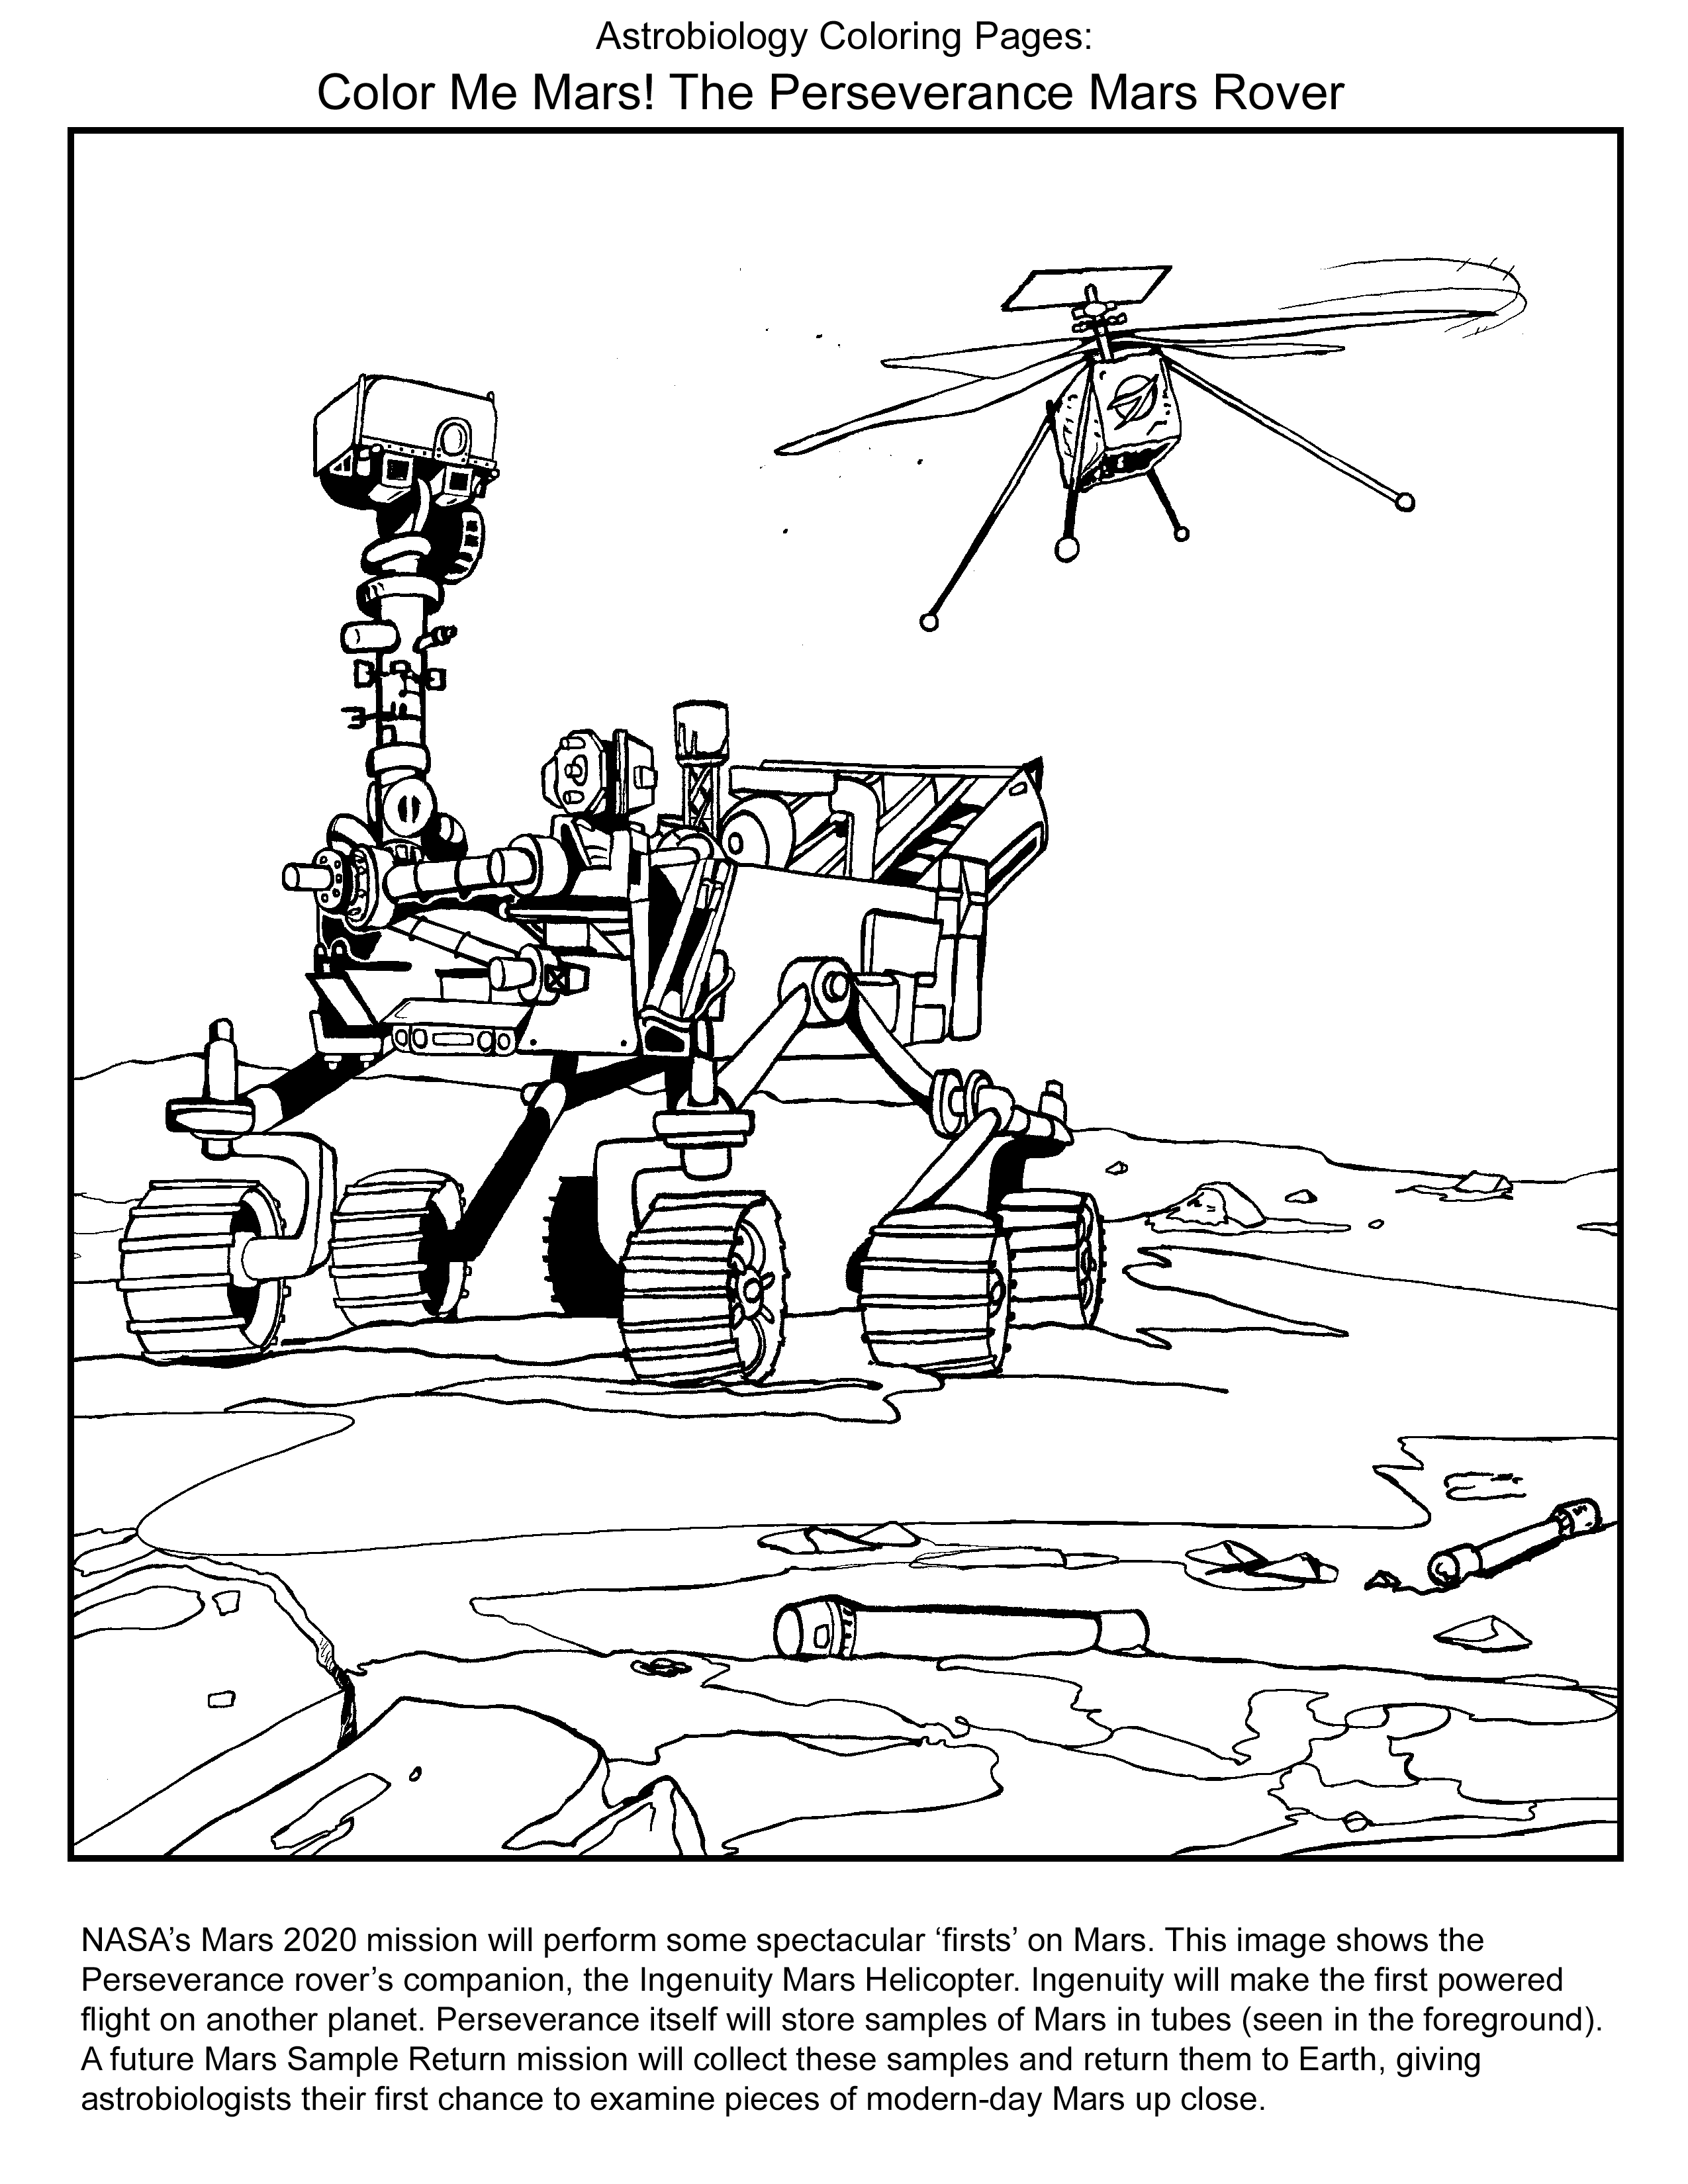 NASA’s Mars 2020 mission will perform some spectacular ‘firsts’ on Mars. This image shows the Perseverance rover’s companion, the Ingenuity Mars Helicopter.